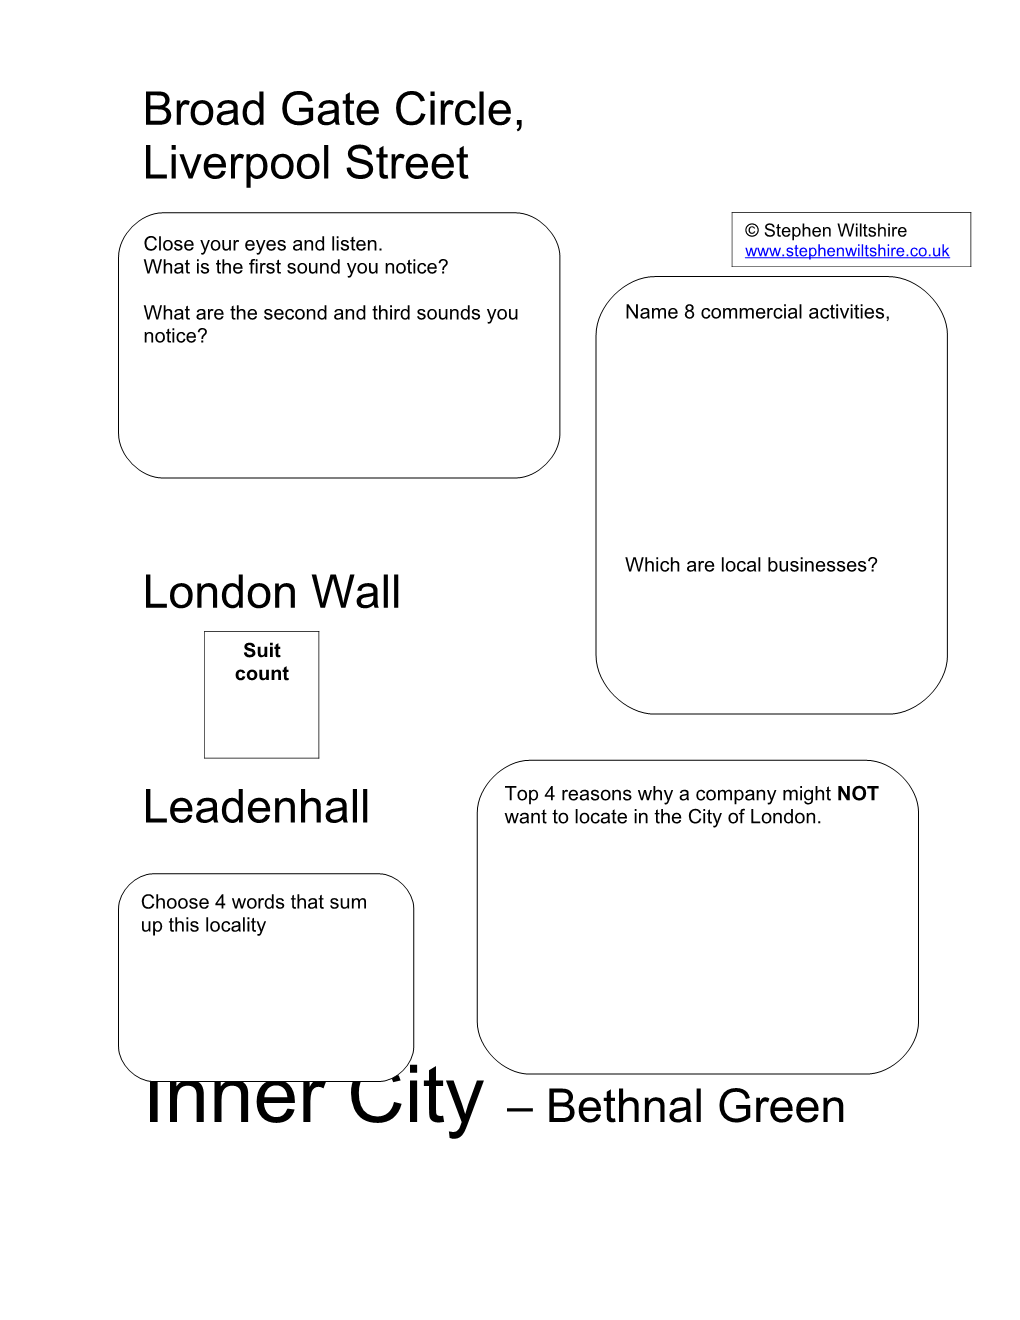 You Can Identify the Characteristics of an Inner City Area